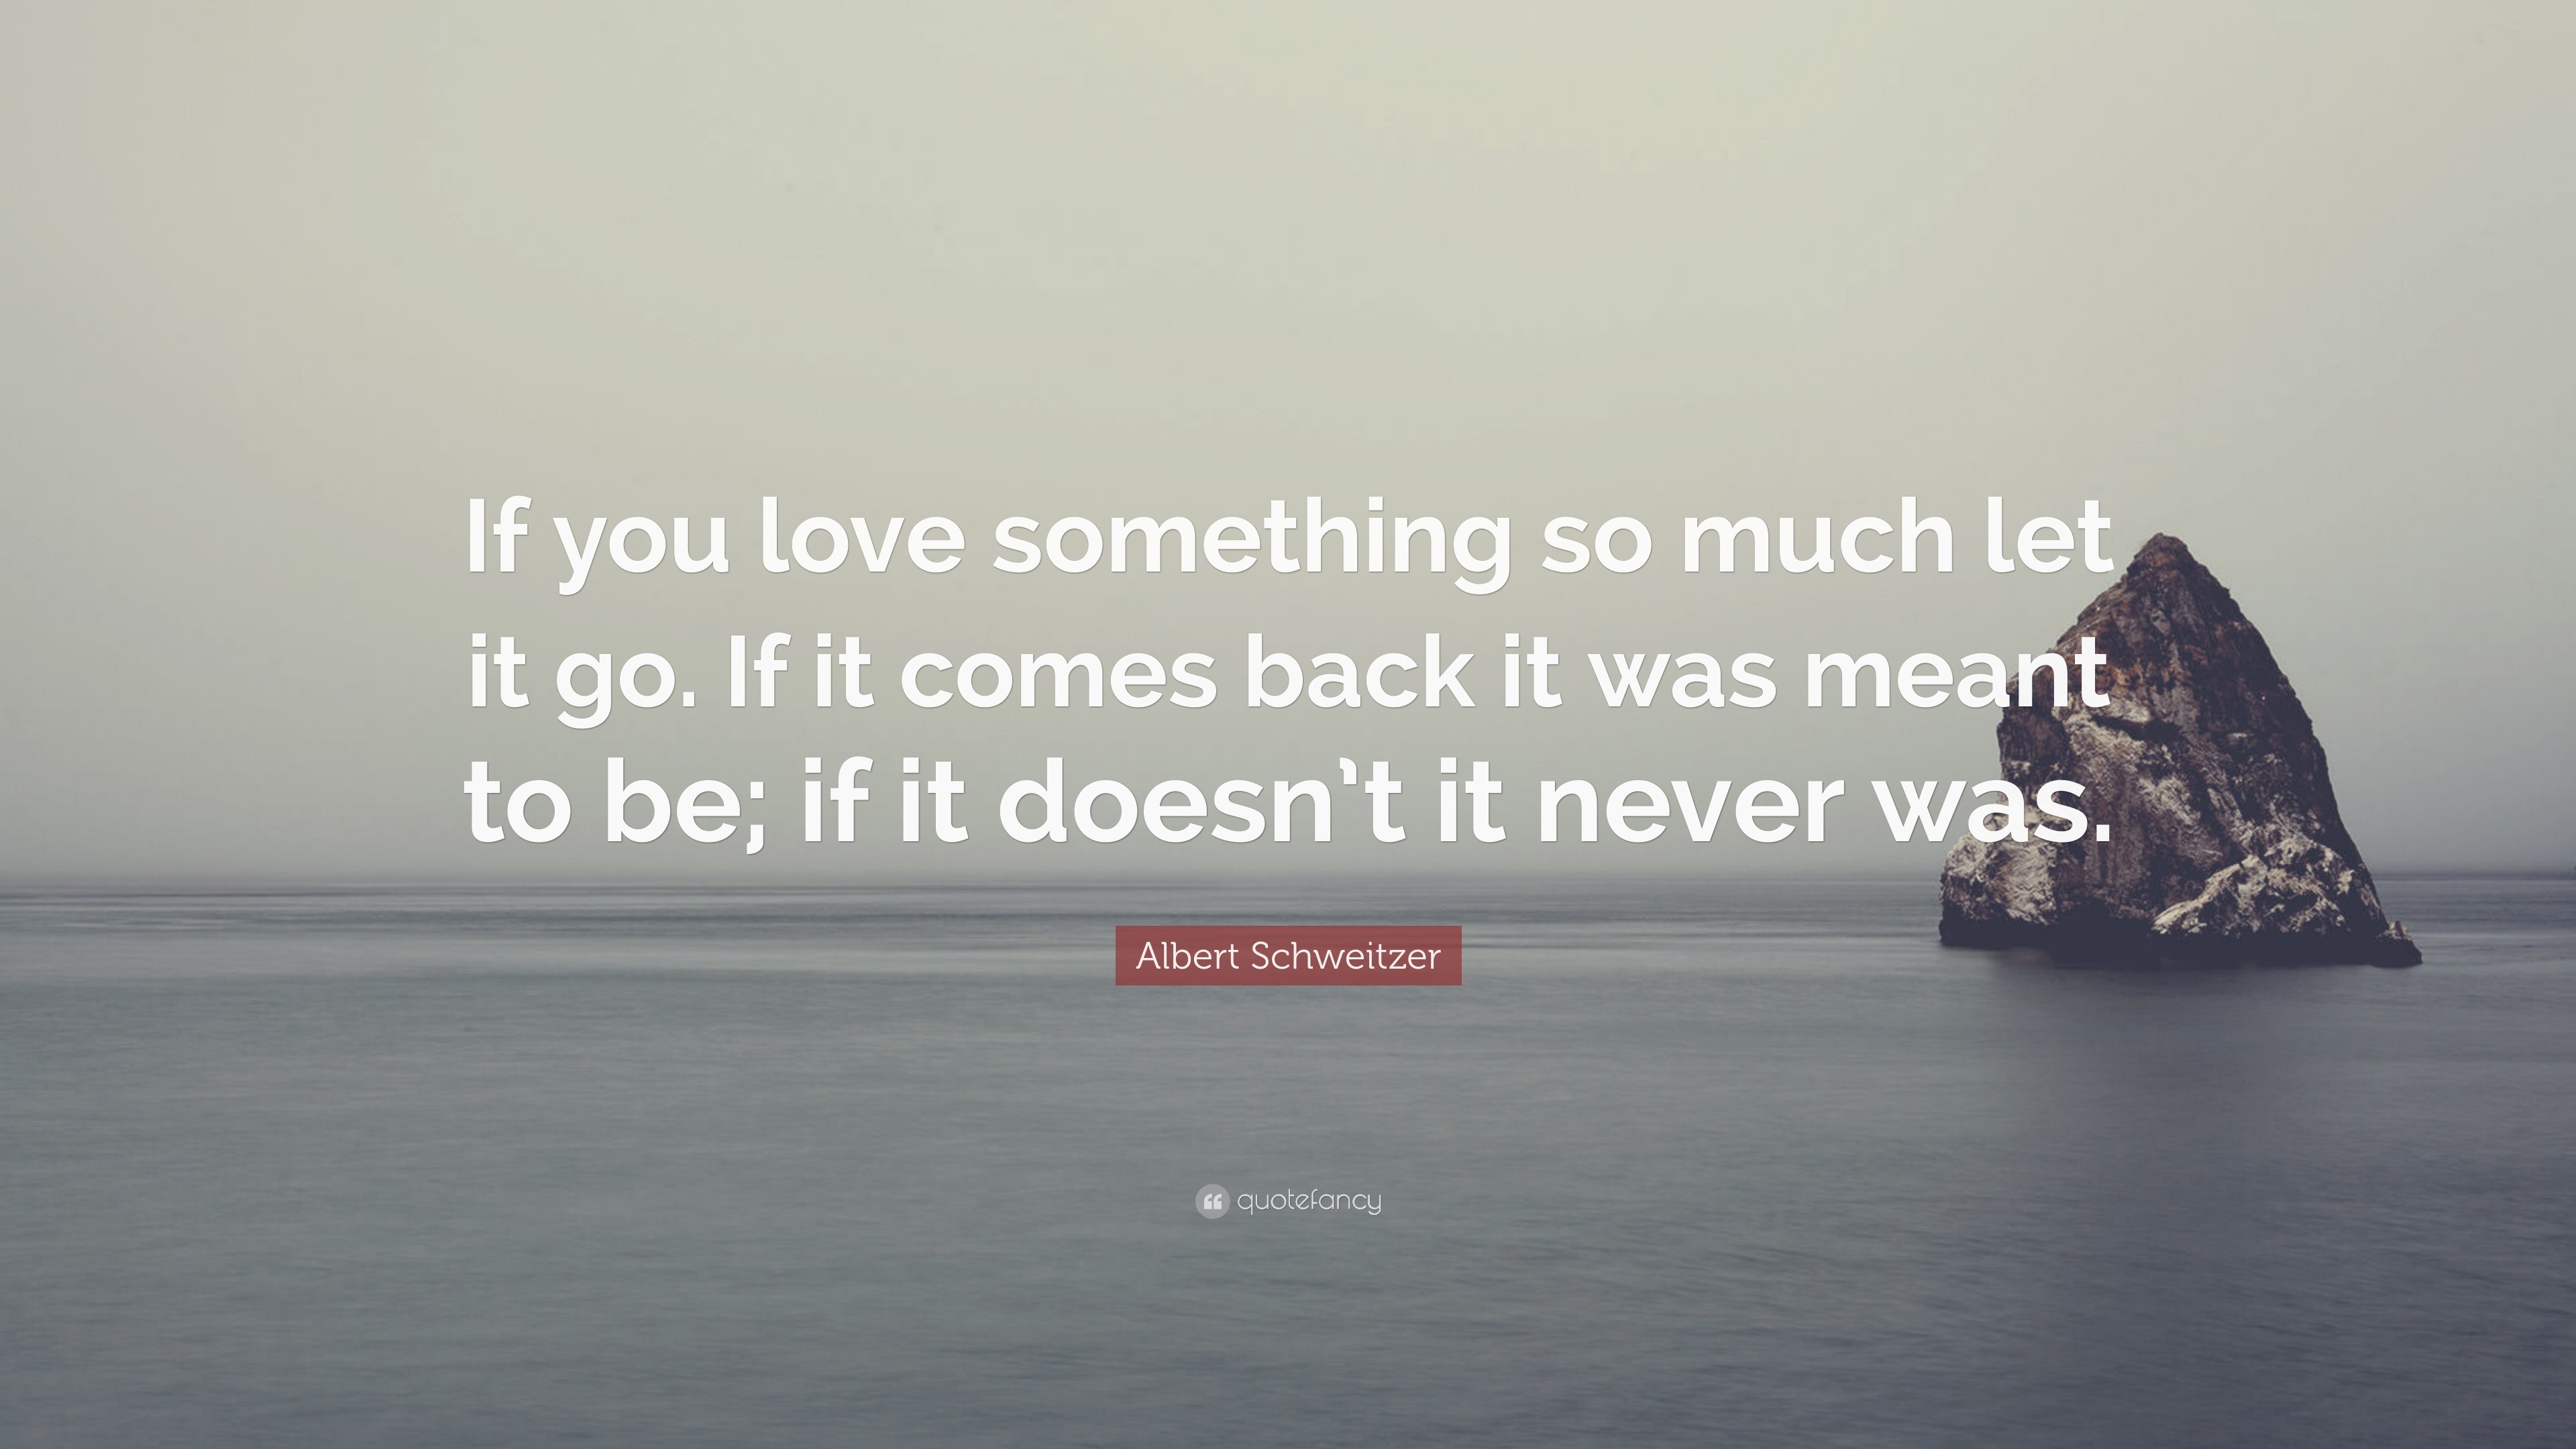 Albert Schweitzer Quote: “If you love something so much let it go. If ...